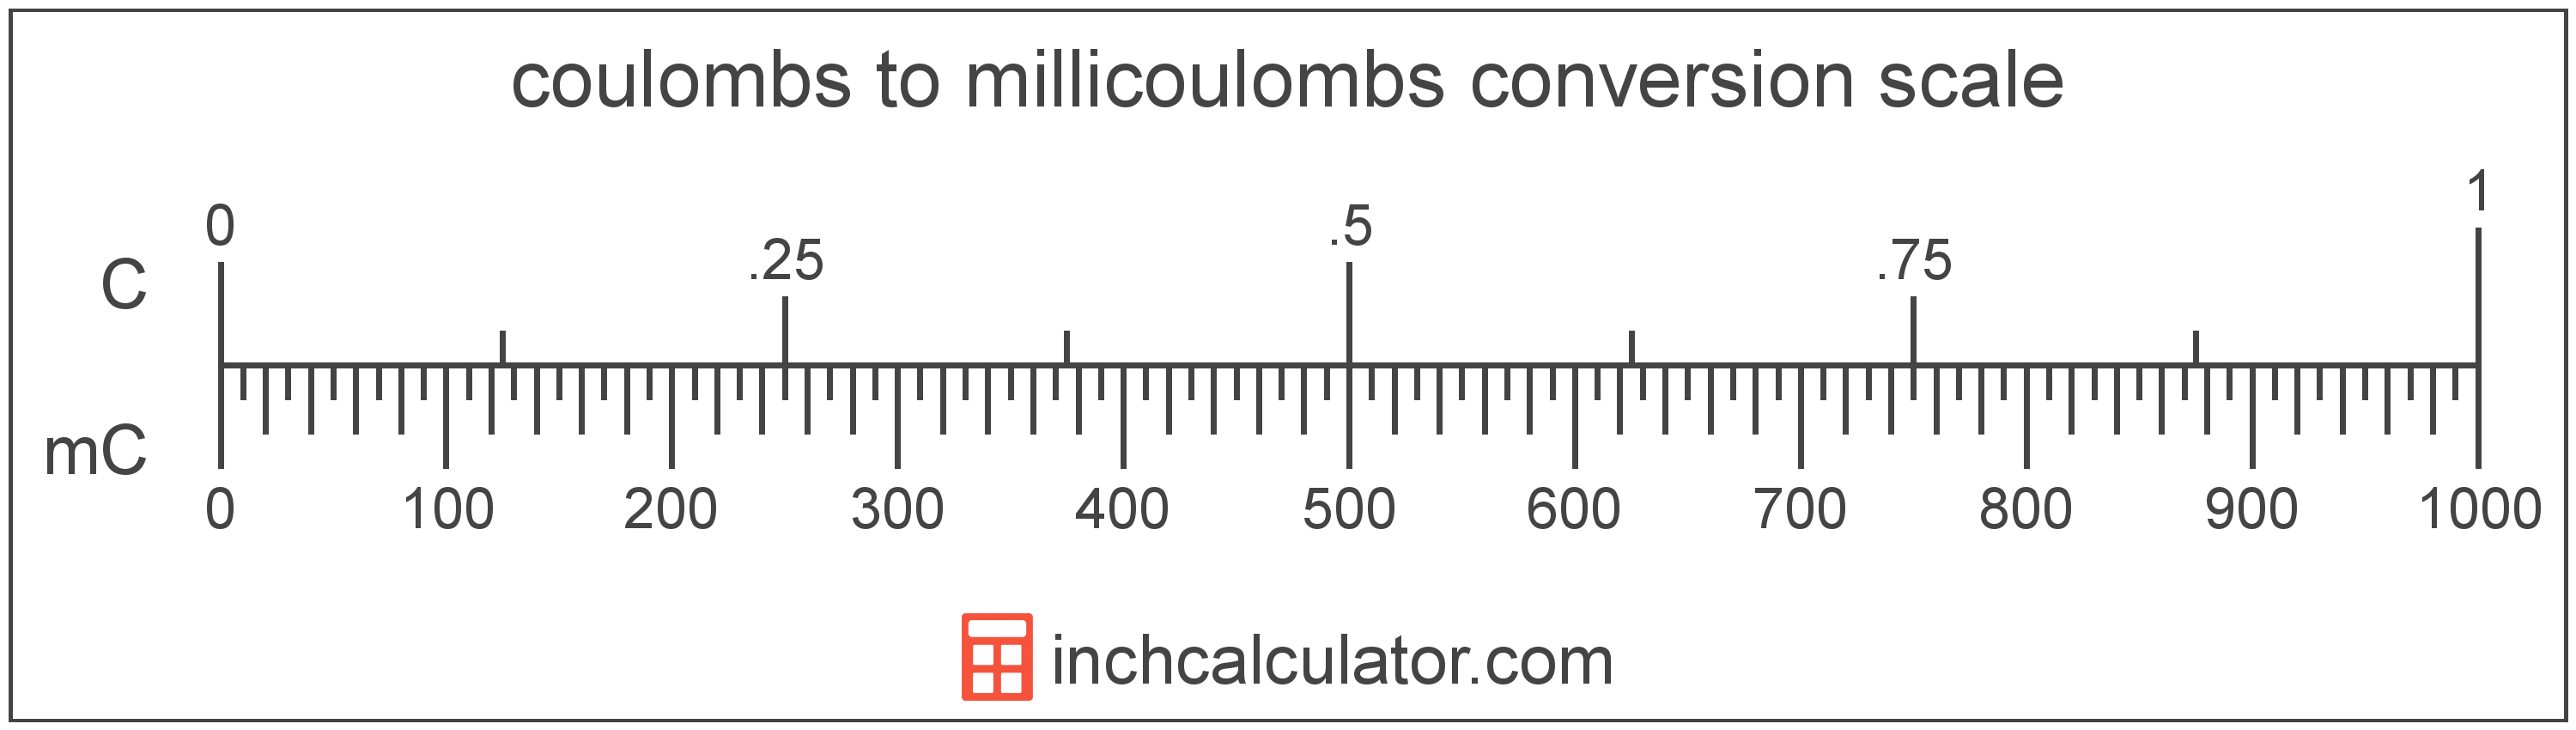 conversion scale showing coulombs and equivalent millicoulombs electric charge values